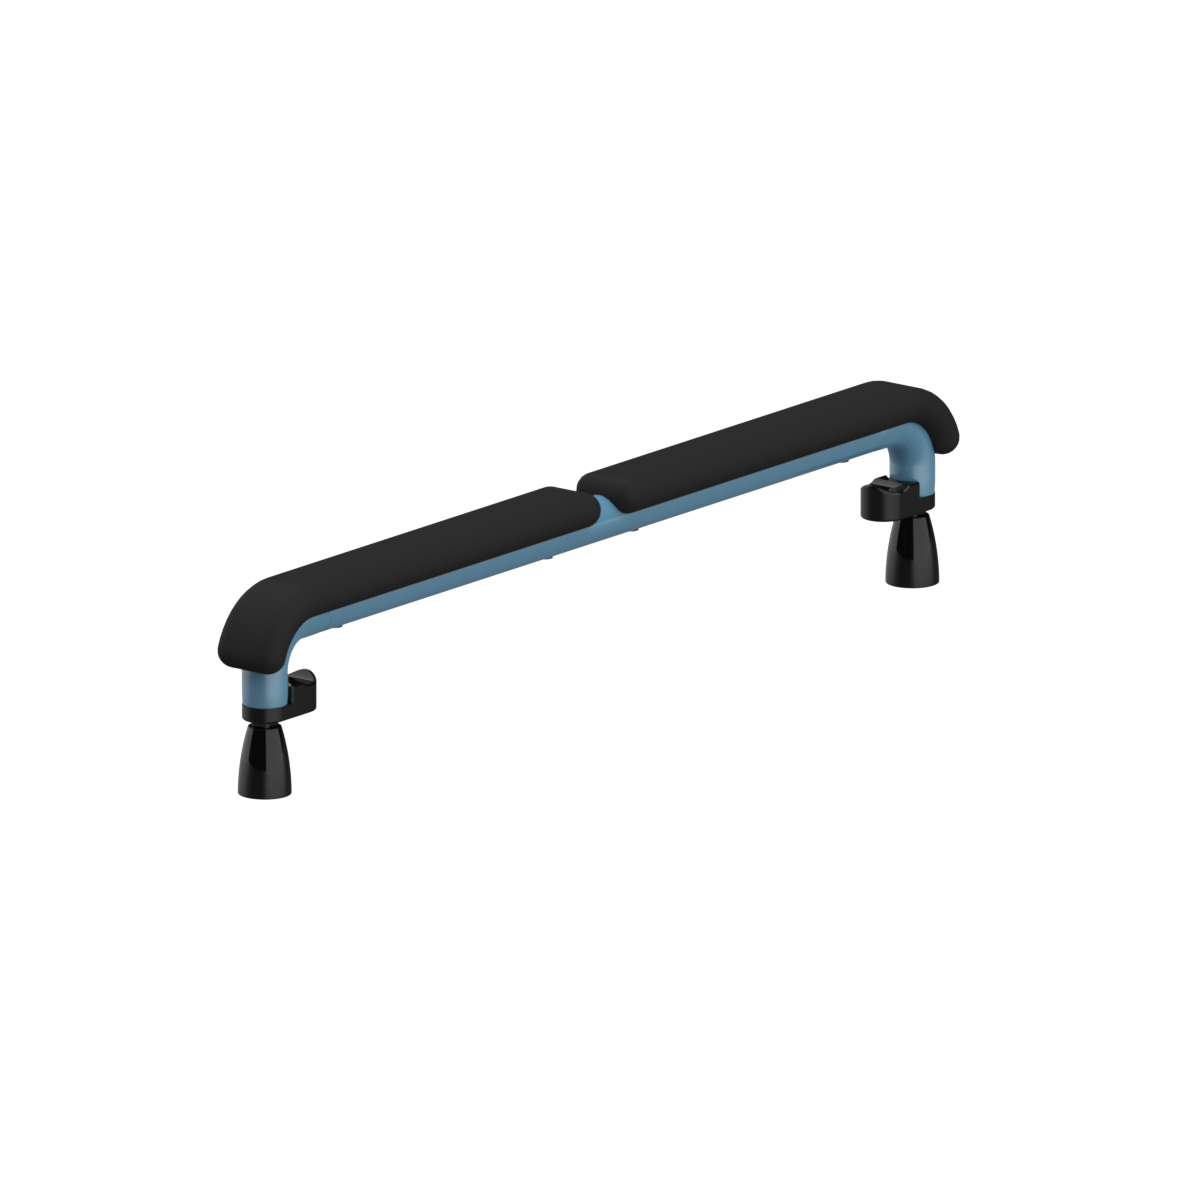 Nylon Care 400 Safety support rail, 825 x 56 x 166 mm, Pastel blue, padded, colour black